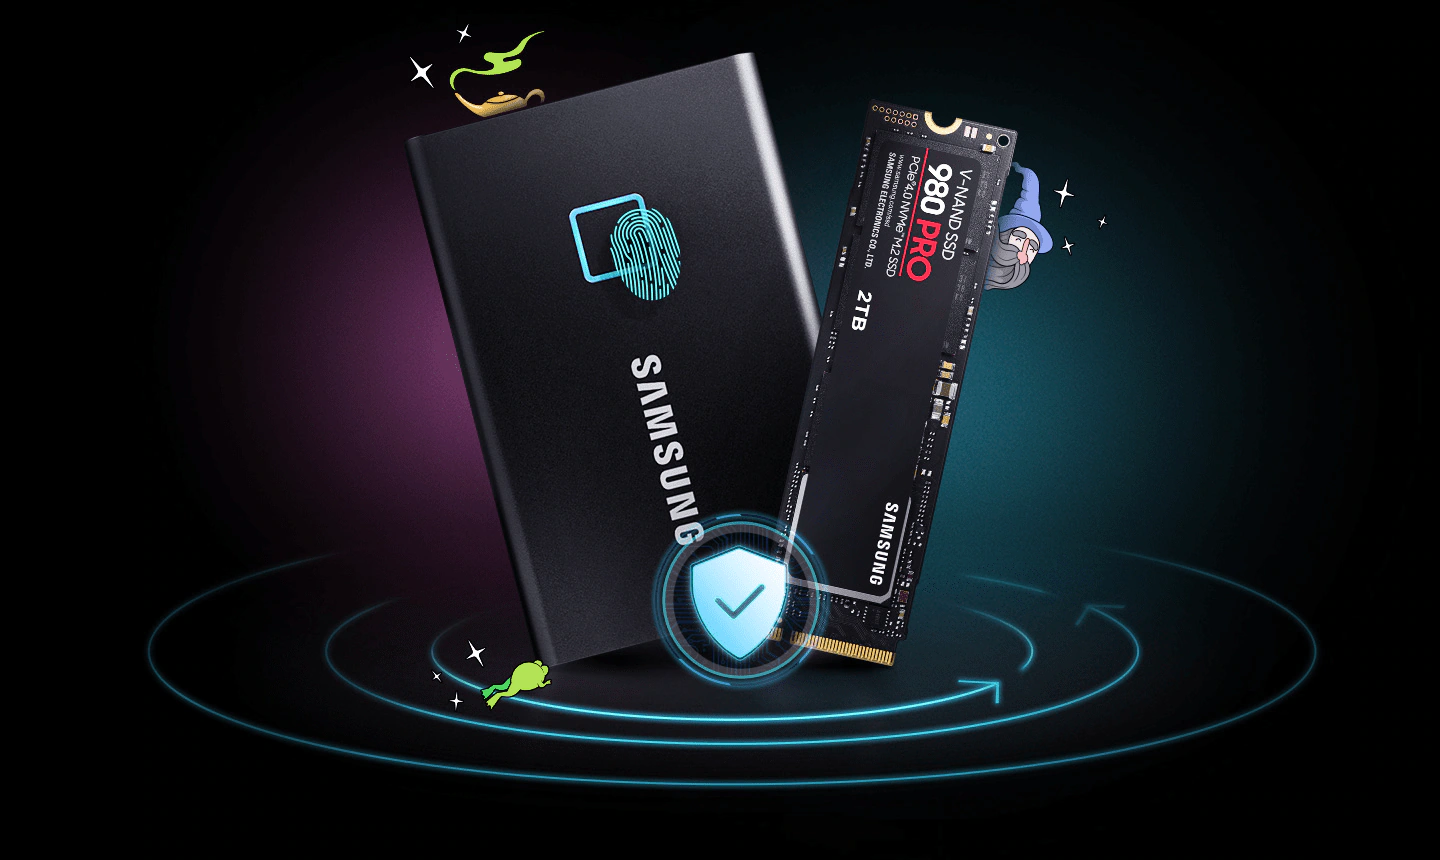 Samsung Ssd Magician Software With Keys For Windows Free Download